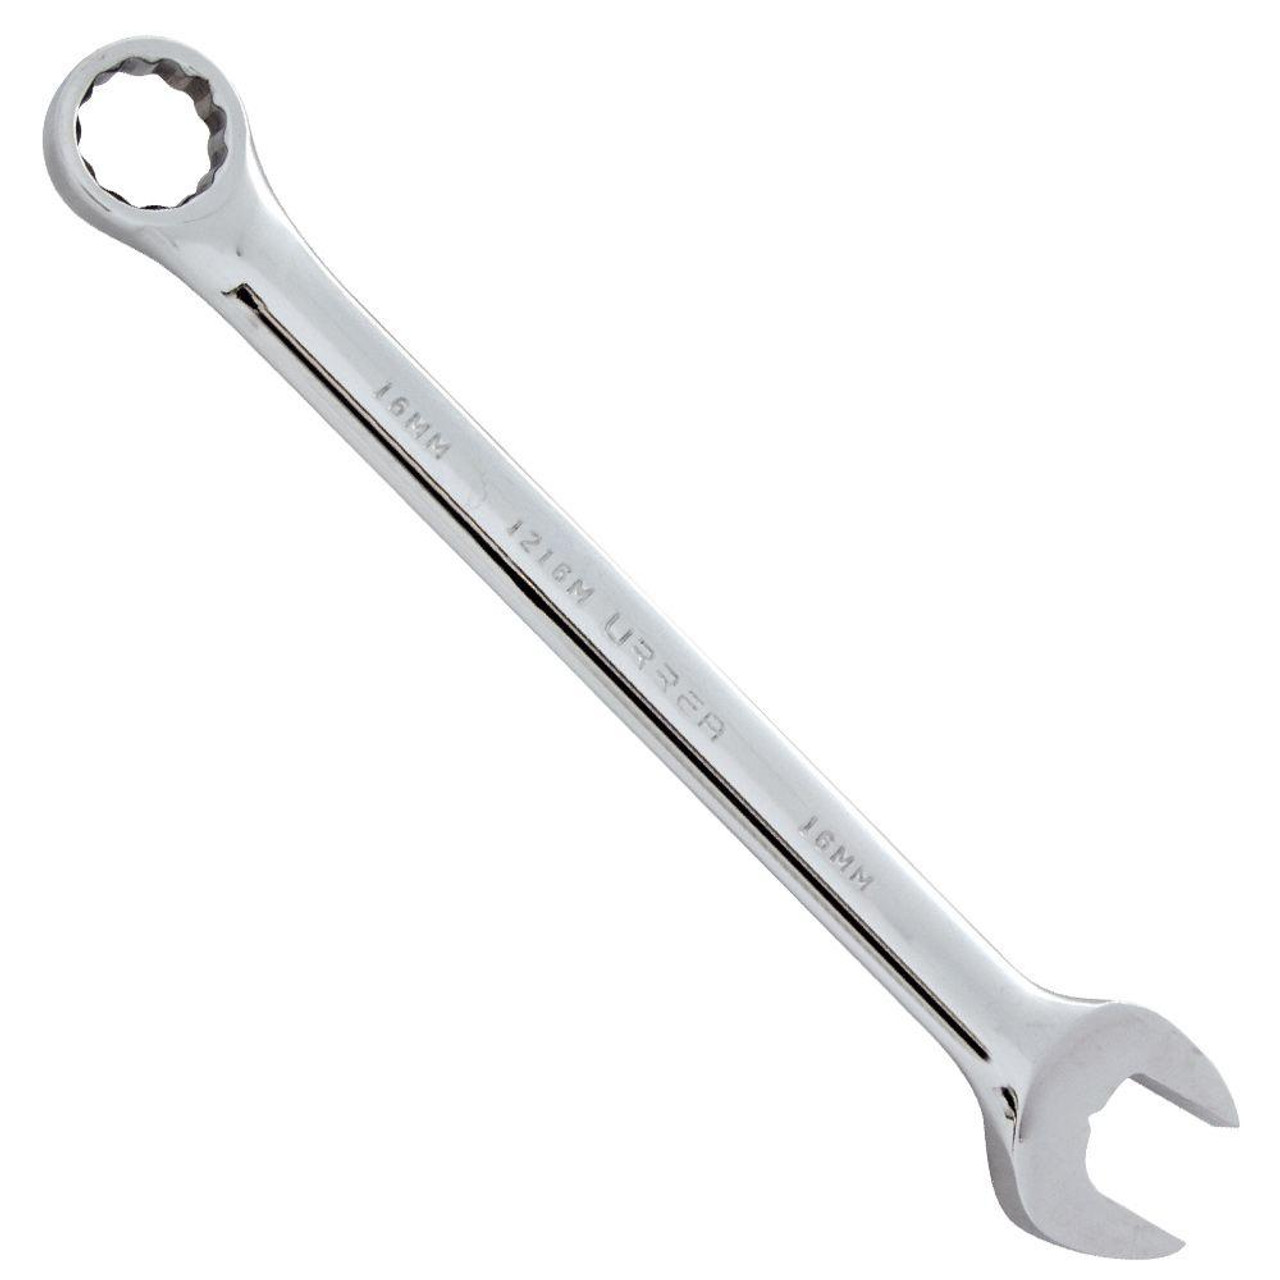 Satin finish combination wrench, Size: 15mm, 12 point, Tool Length: 7-1/2"